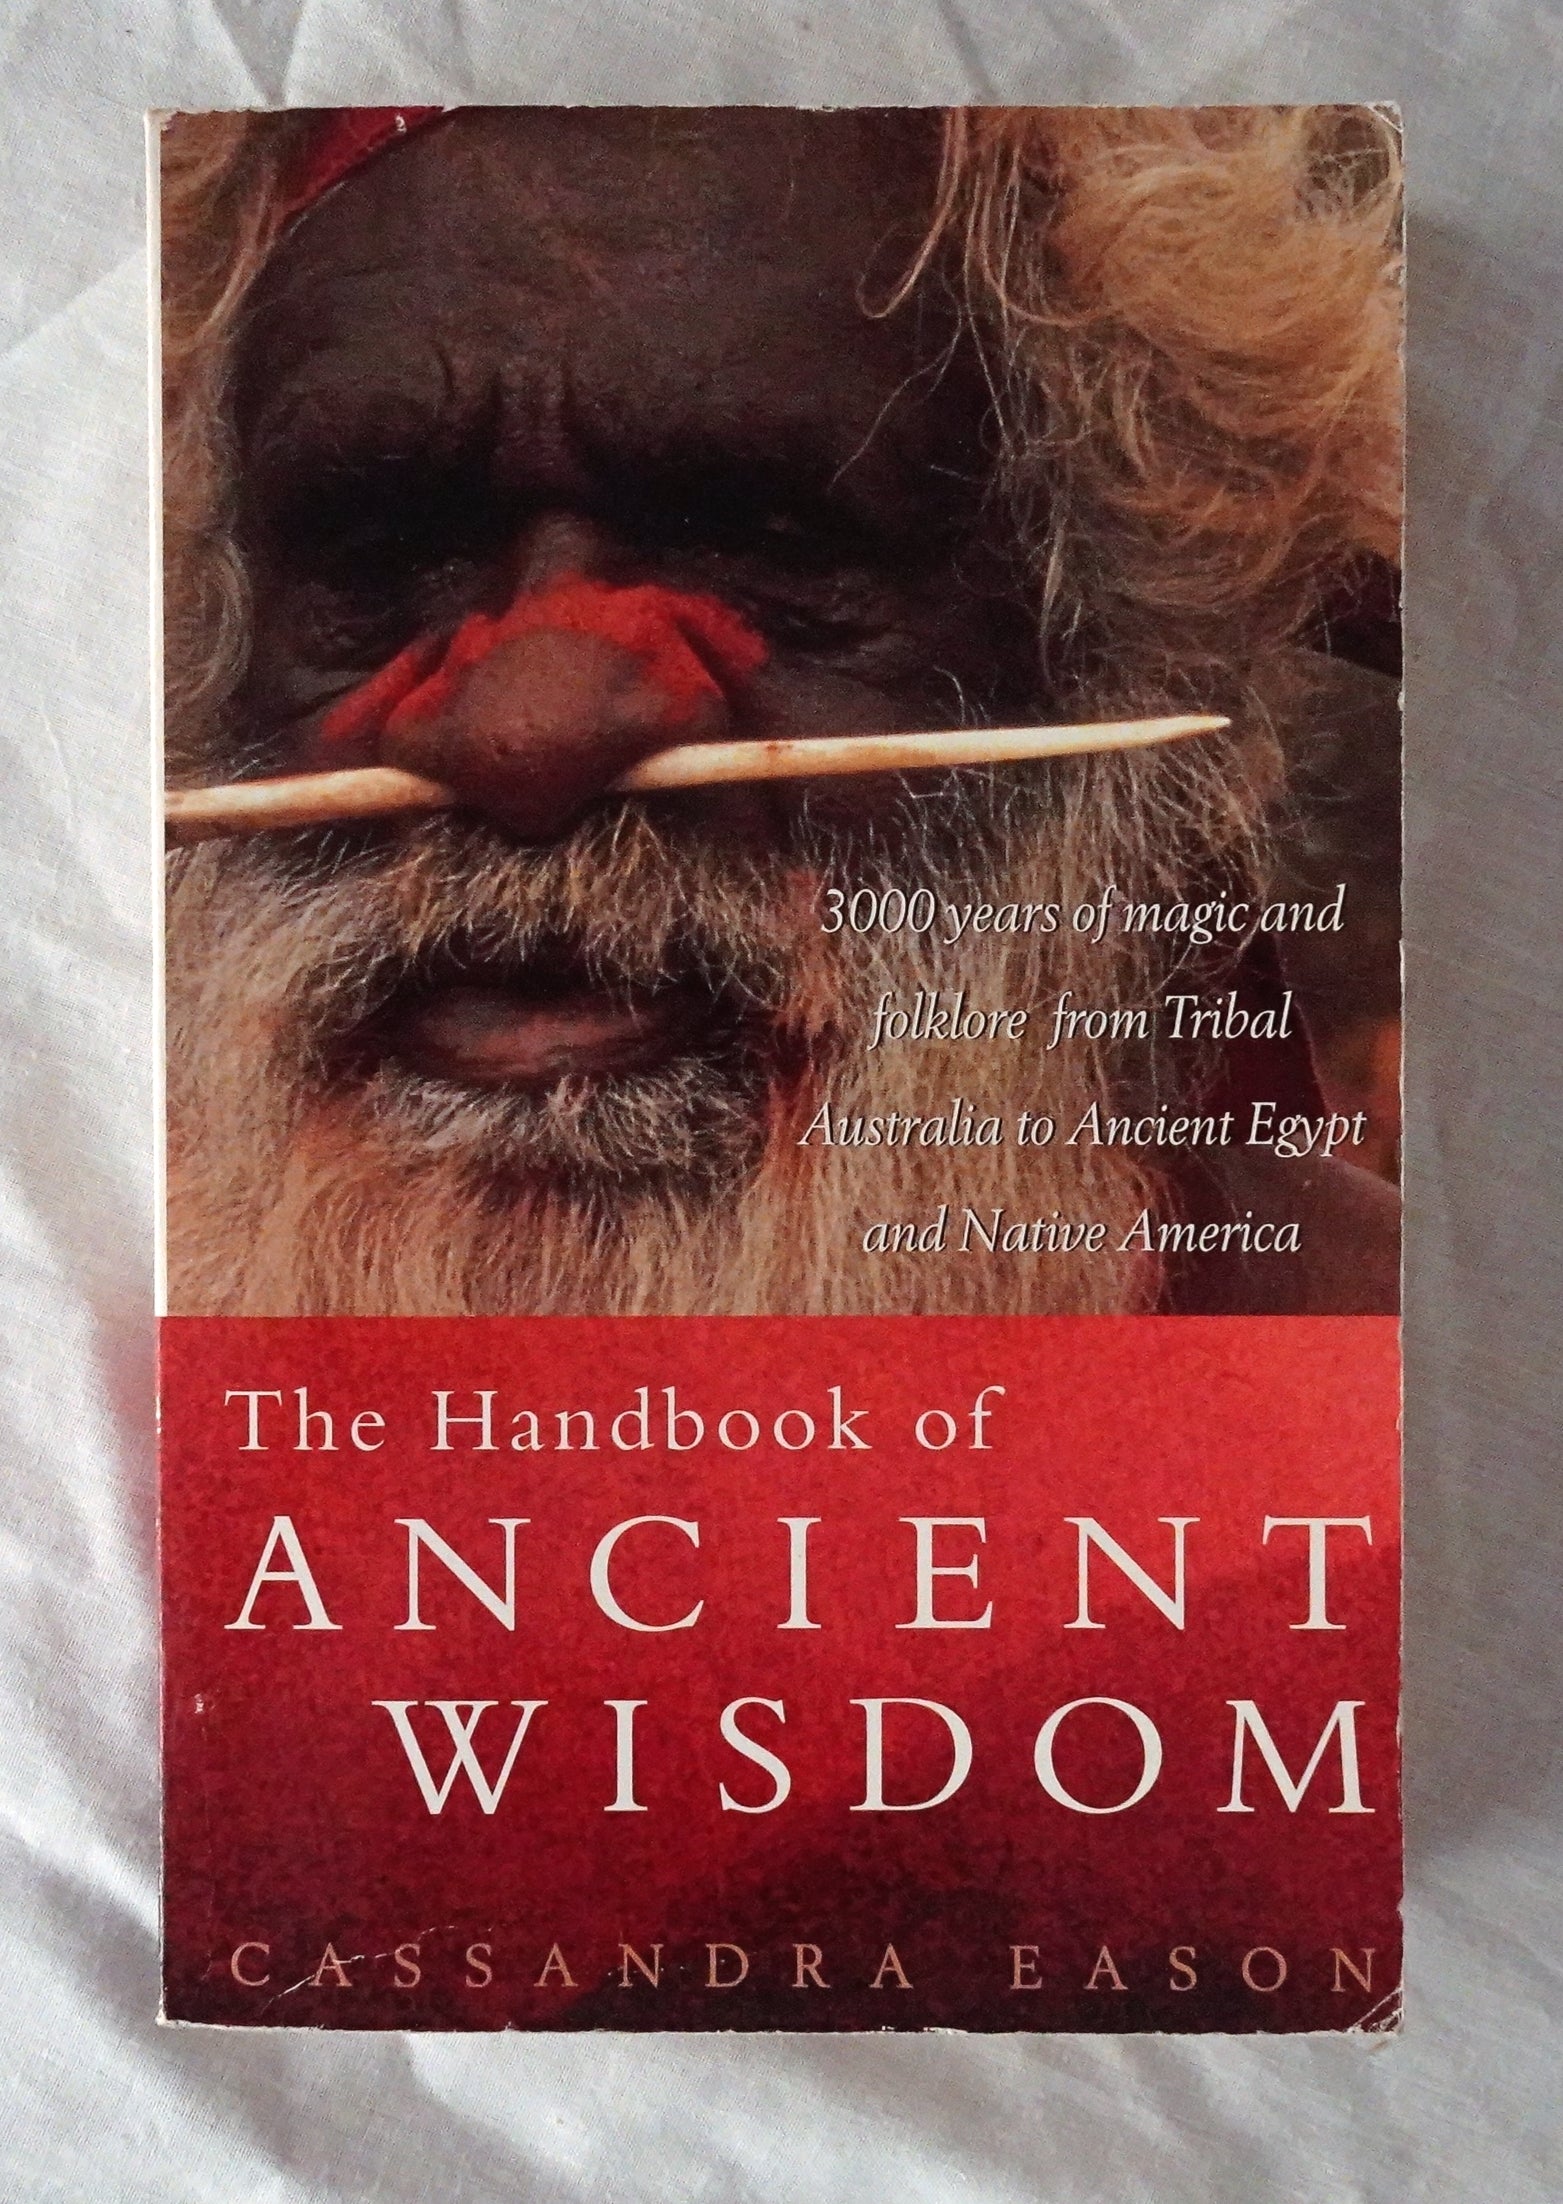 The Handbook of Ancient Wisdom  3000 years of magic and folklore from Tribal Australia to Ancient Egypt and Native America  by Cassandra Eason